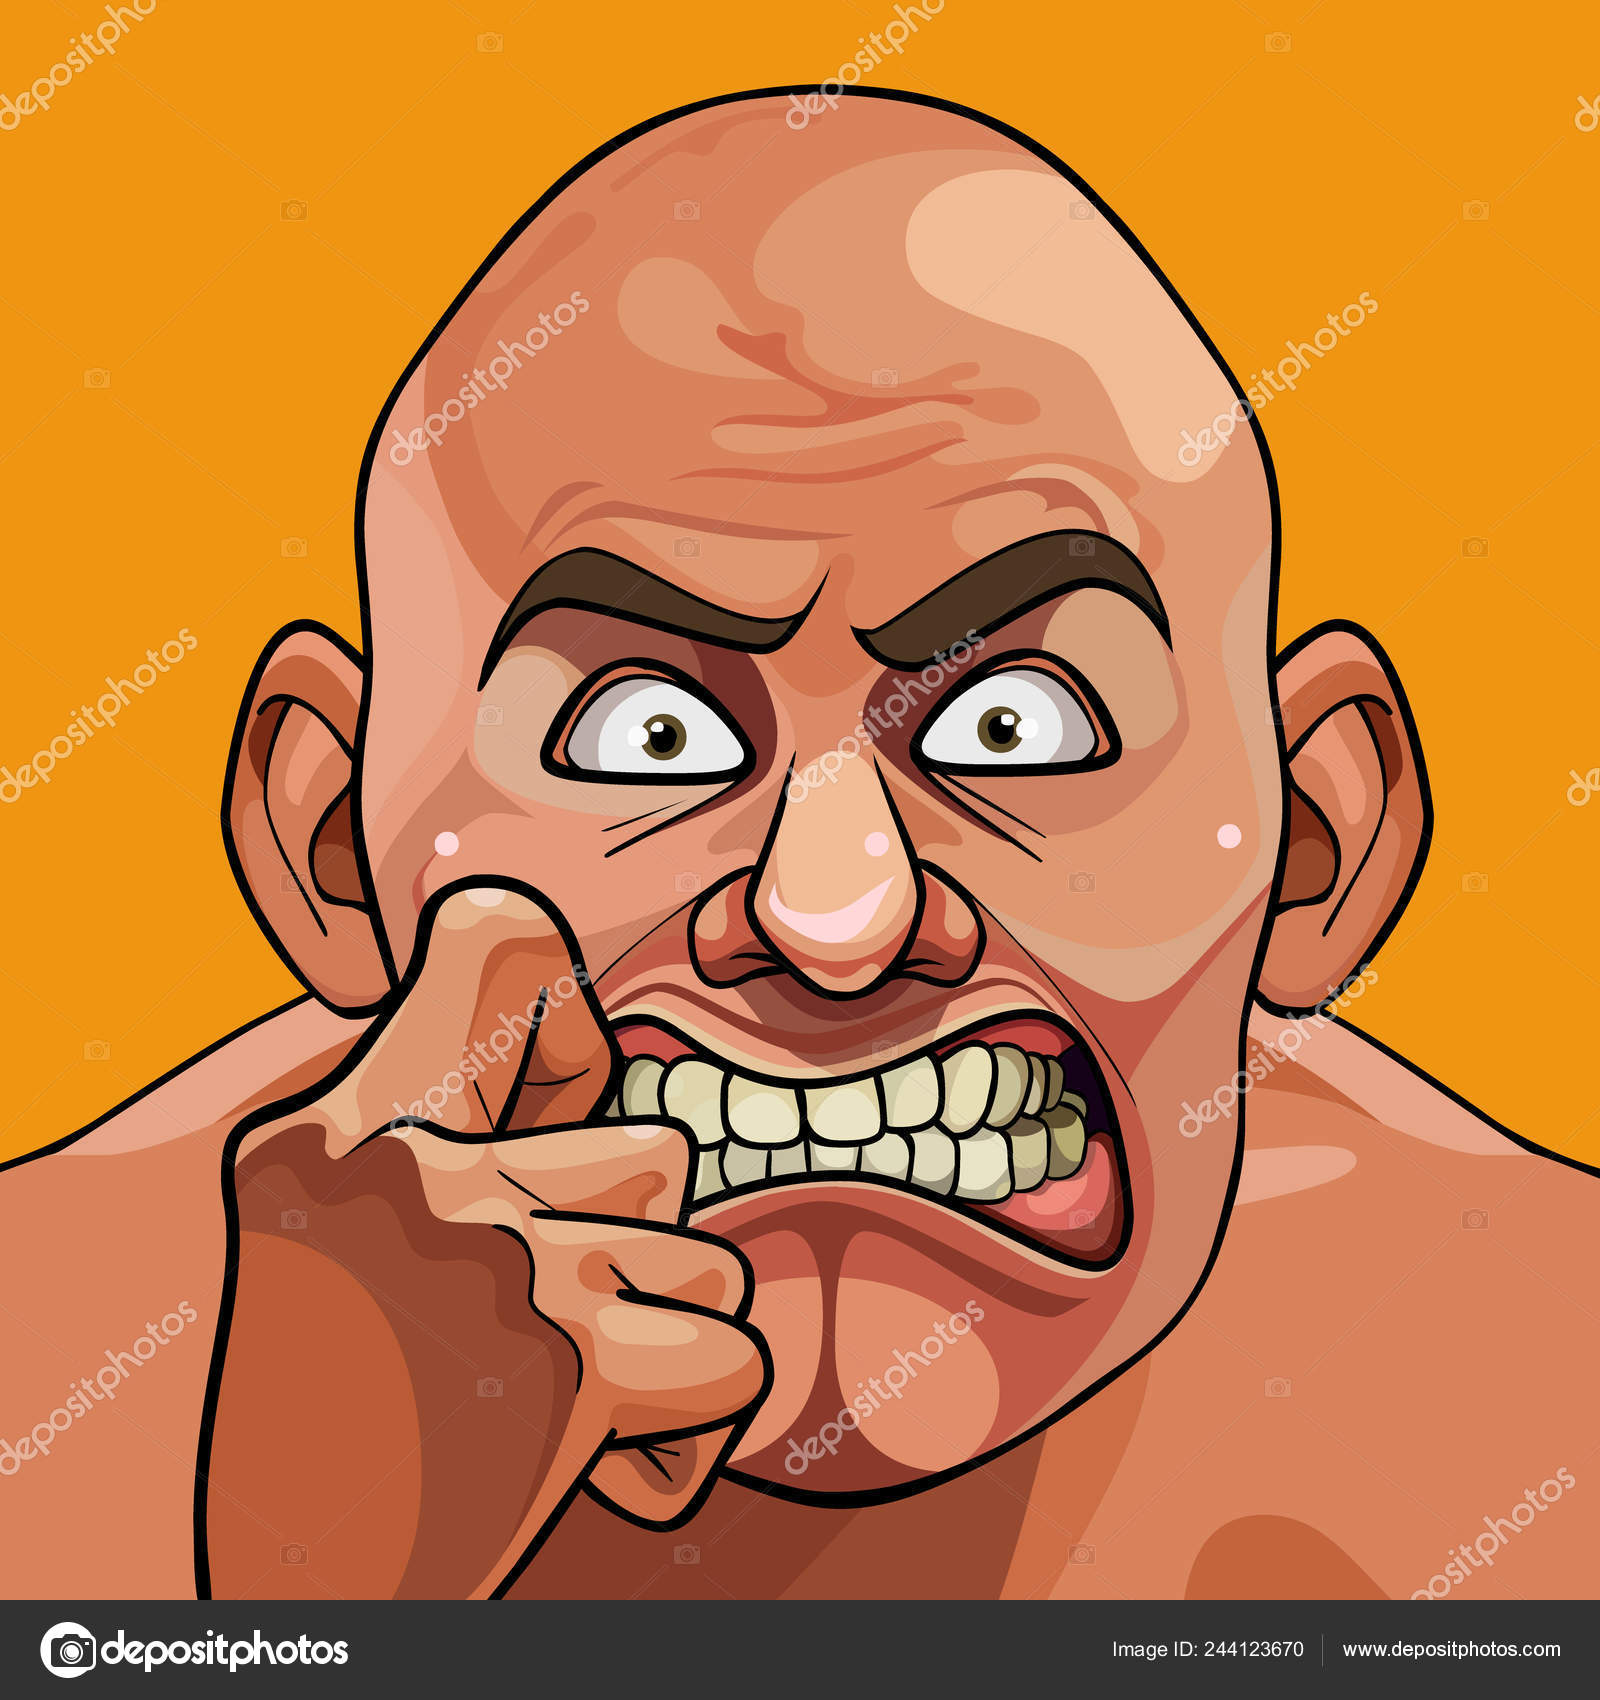 Face Cartoon Bald Funny Scary Man Very Frightened Stock Vector Image by  ©Westamult #244123670